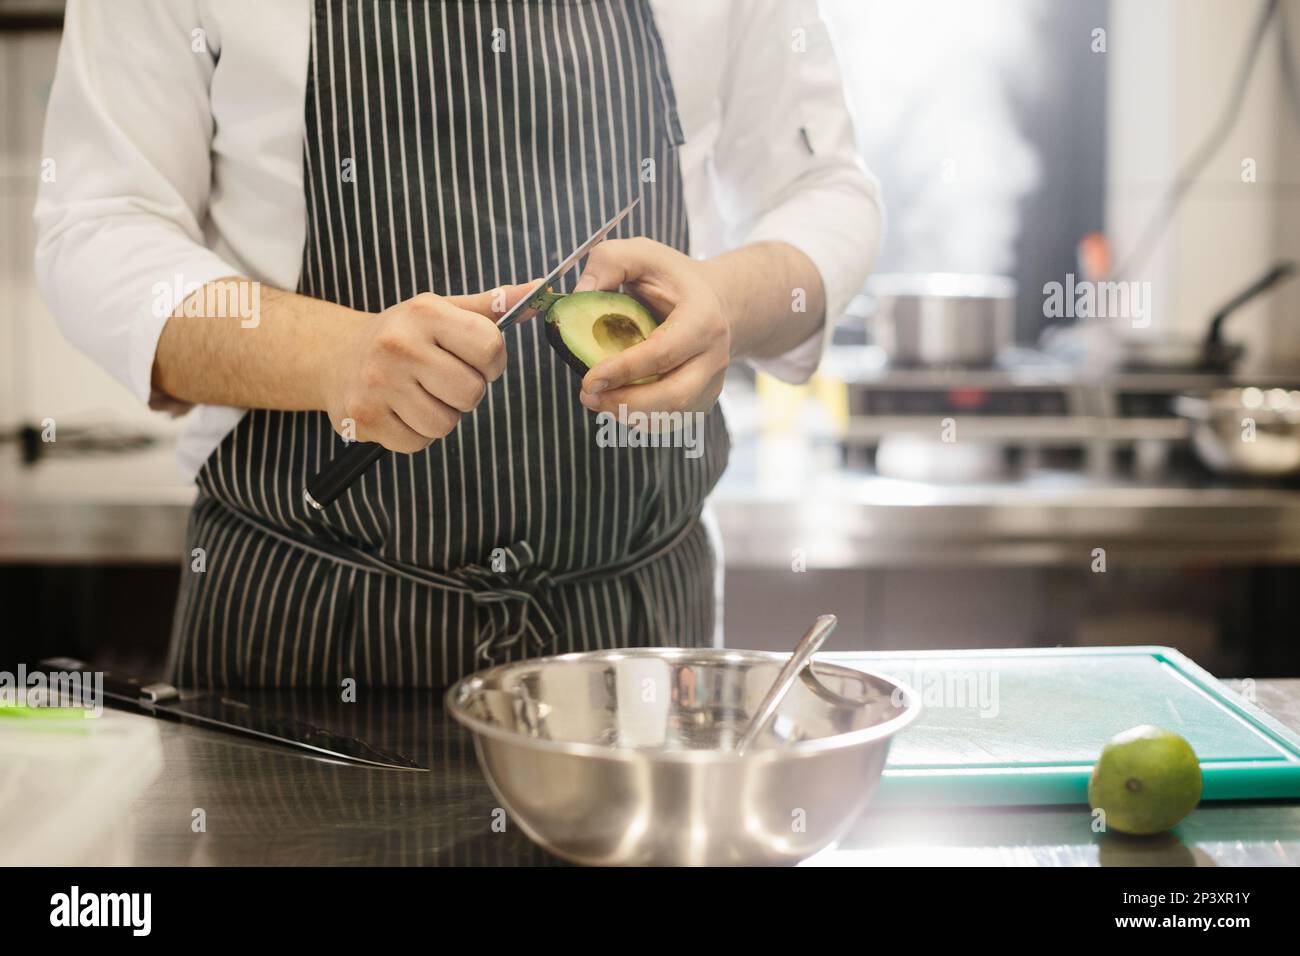 The chef is preparing food. Close-up of a male chef peeling an avocado. Stock Photo